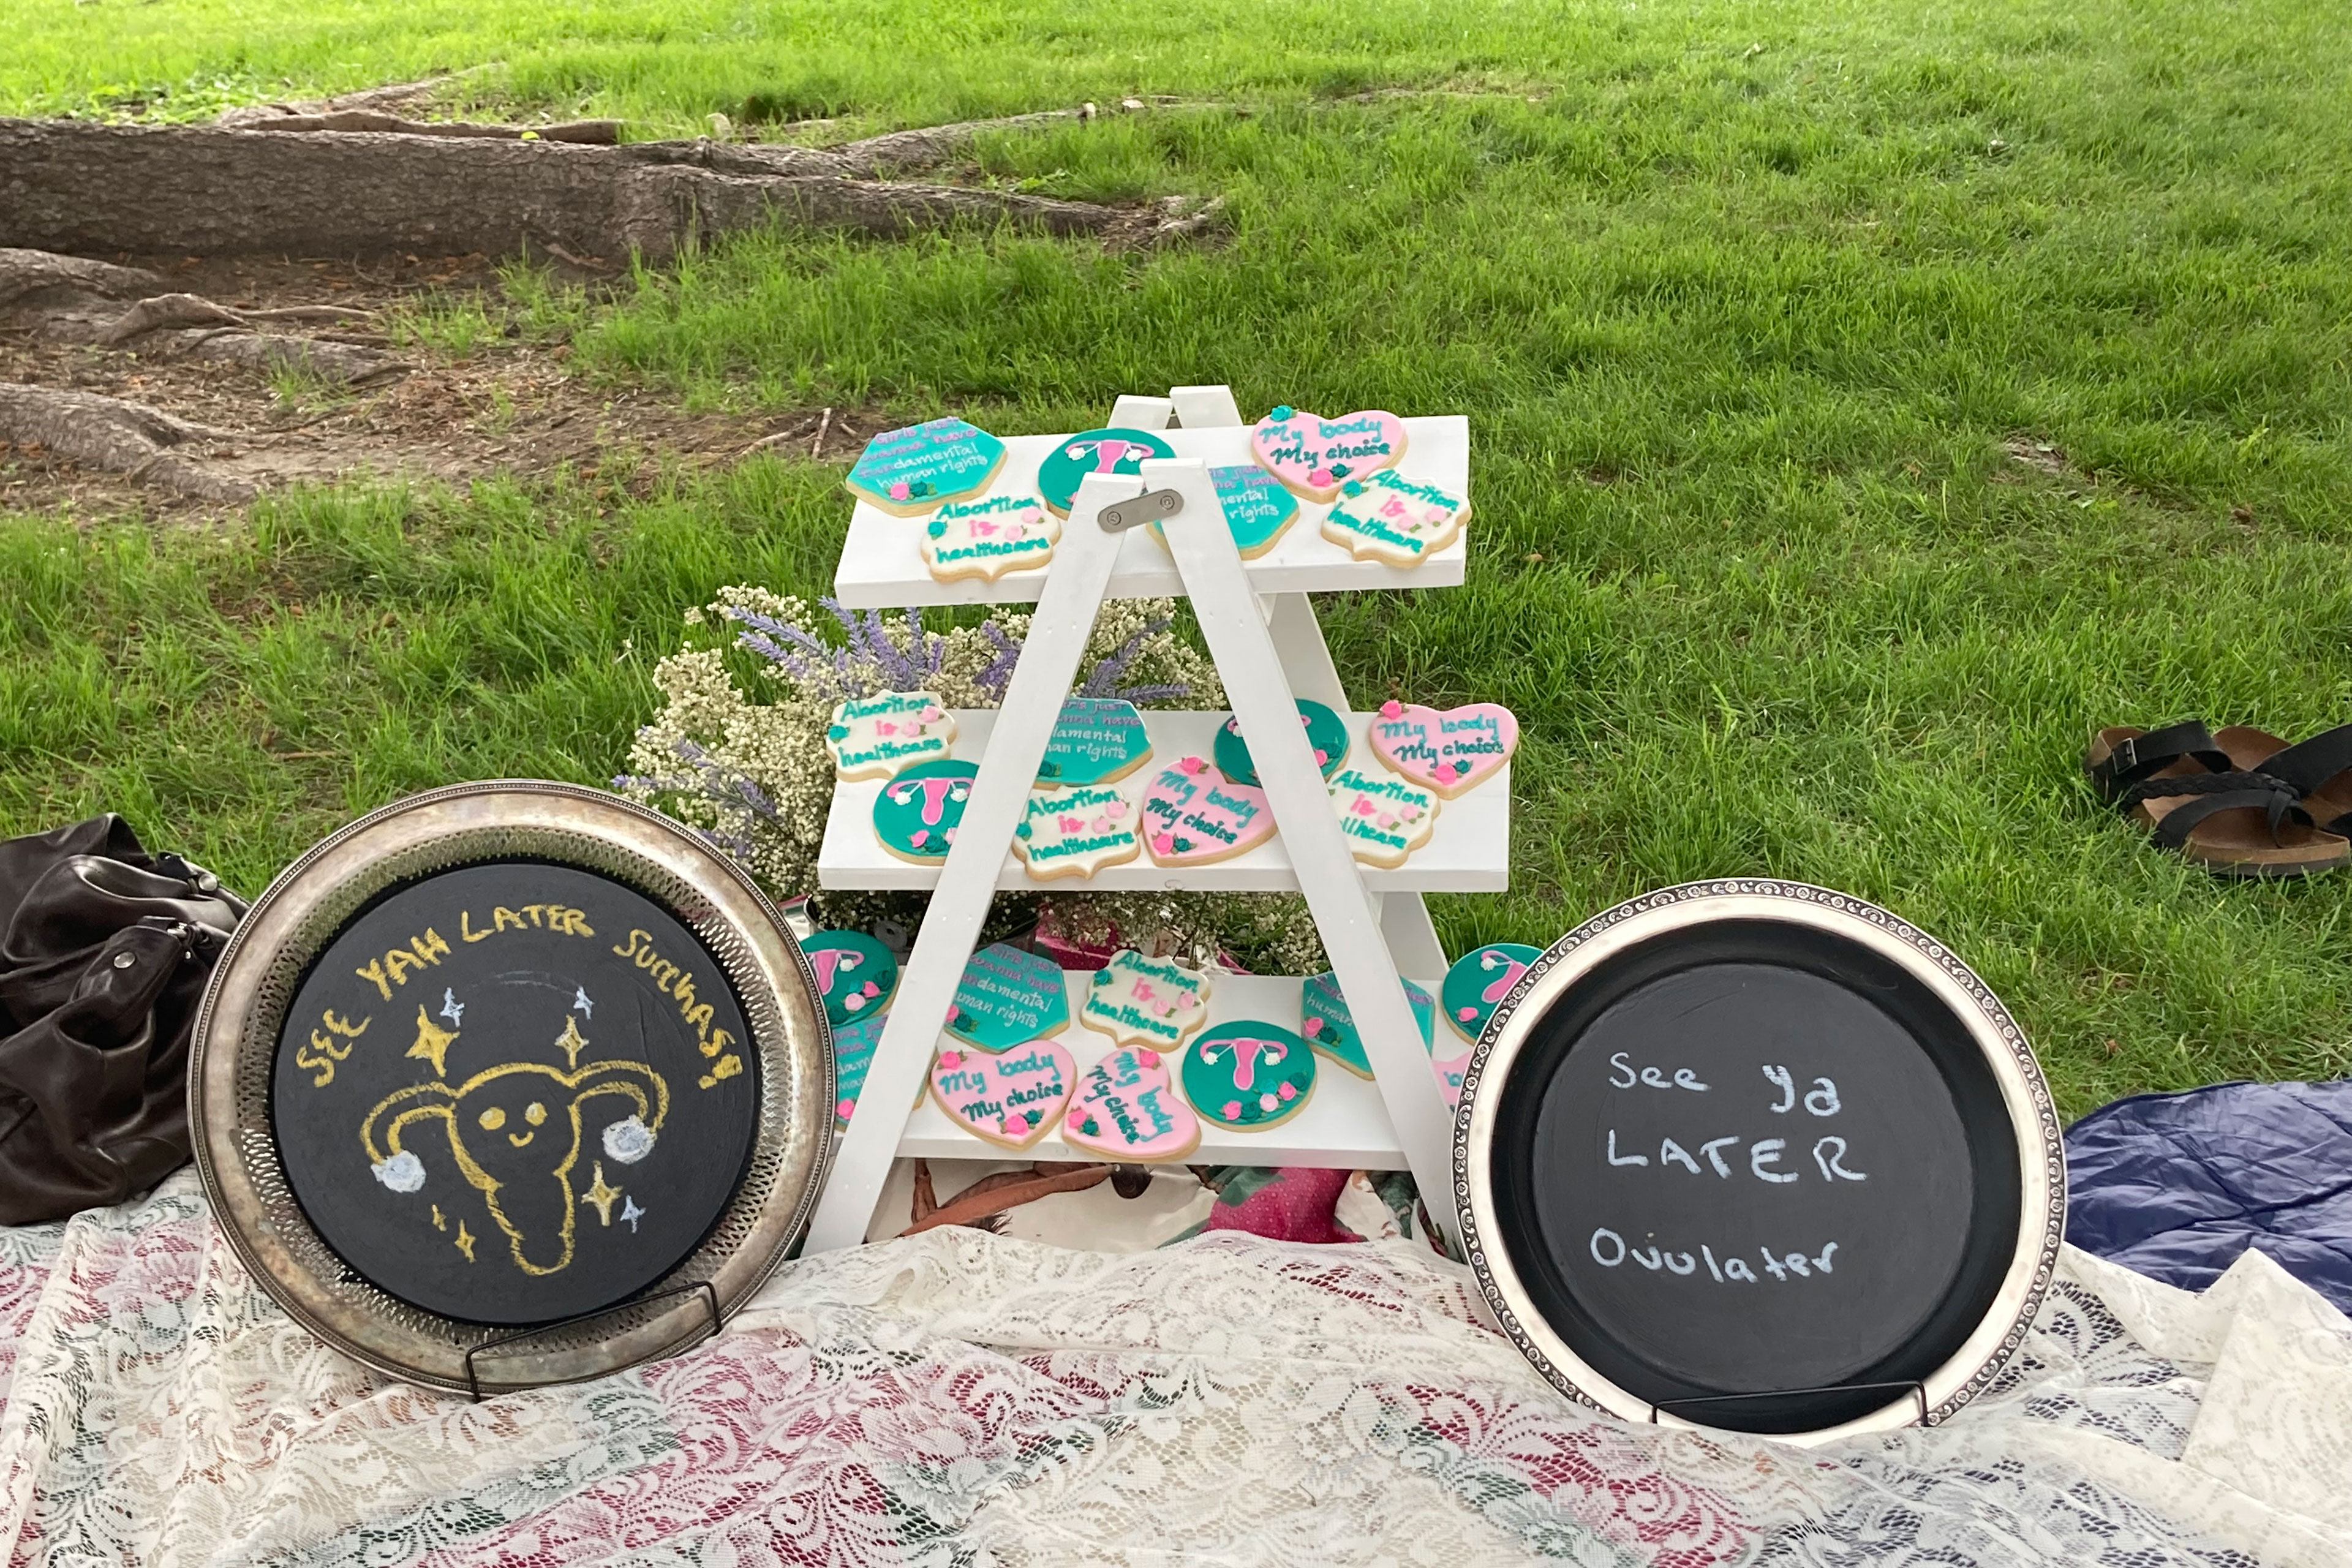 A photo shows a picnic setup with cookies frosted with abortion-rights slogans and signs that read, "See ya later, ovulator," and "See ya later, suckas," with a drawing of a uterus.